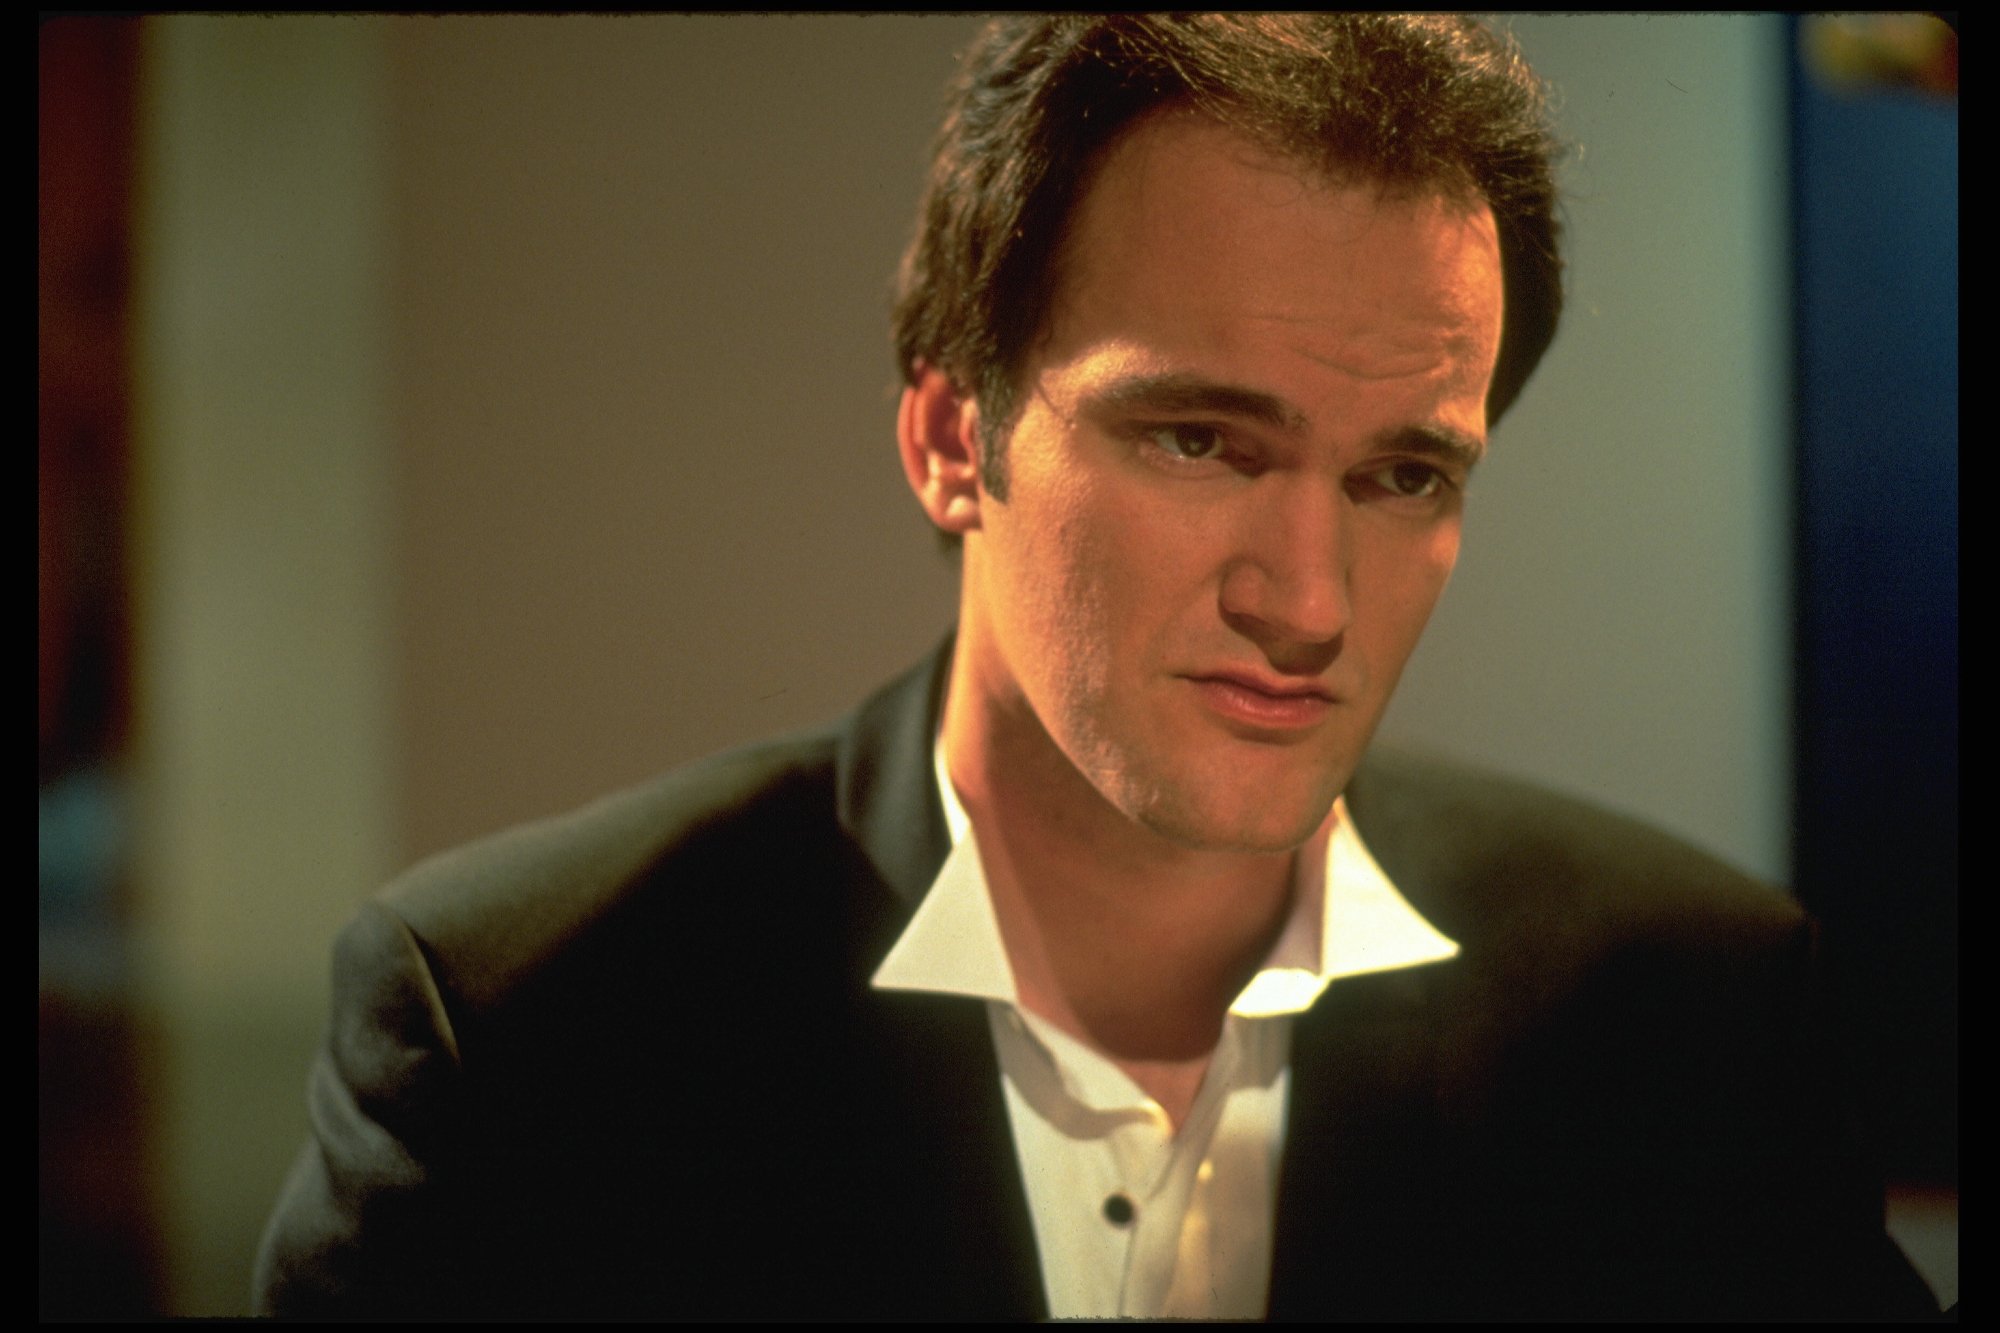 'Pulp Fiction' filmmaker Quentin Tarantino looking off to the side wearing a suit